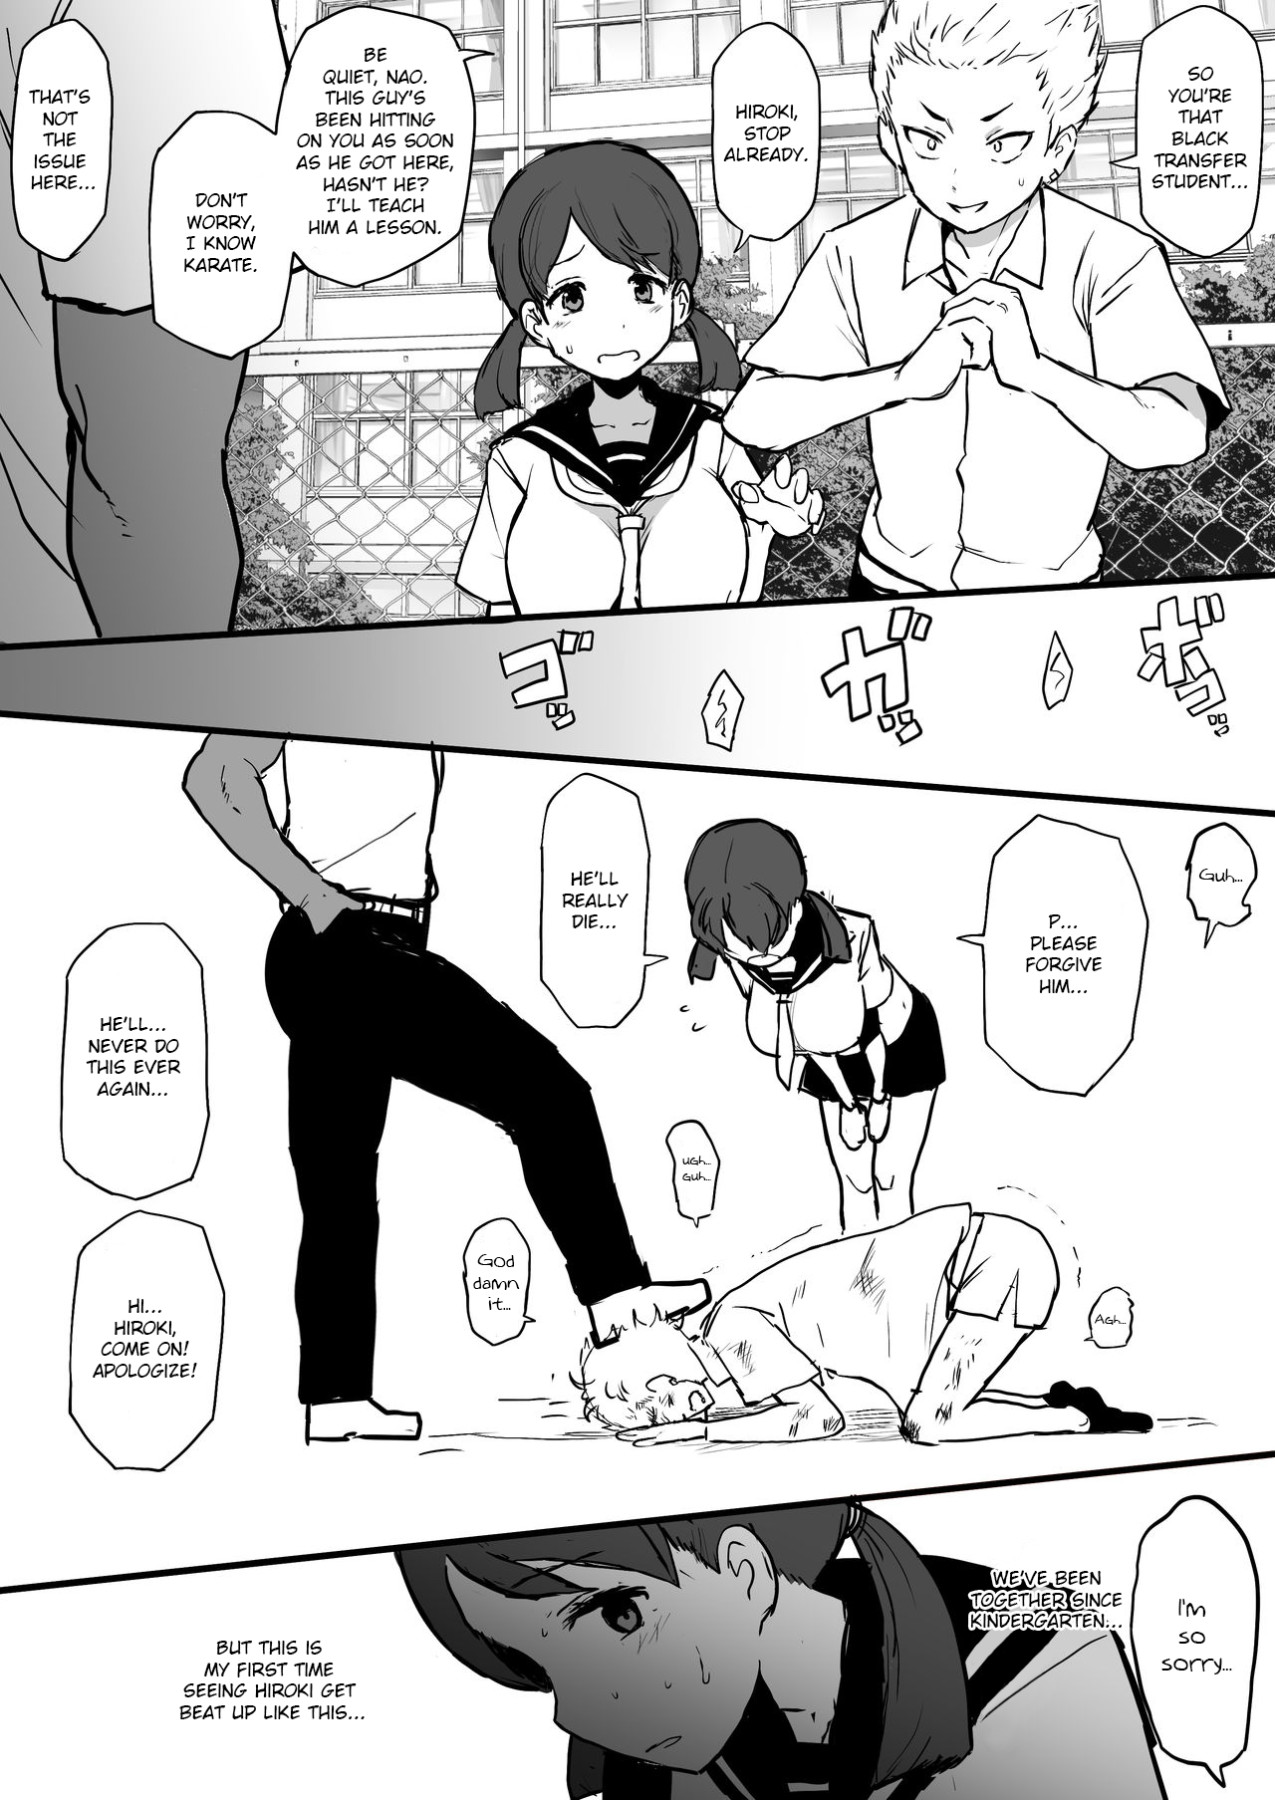 Hentai Manga Comic-My Childhood Friend's Getting Fucked By a Black Transfer Student Chapter 1-6 part 1 Plus Bonus chapter: Stolen Mother's Breasts-Read-1